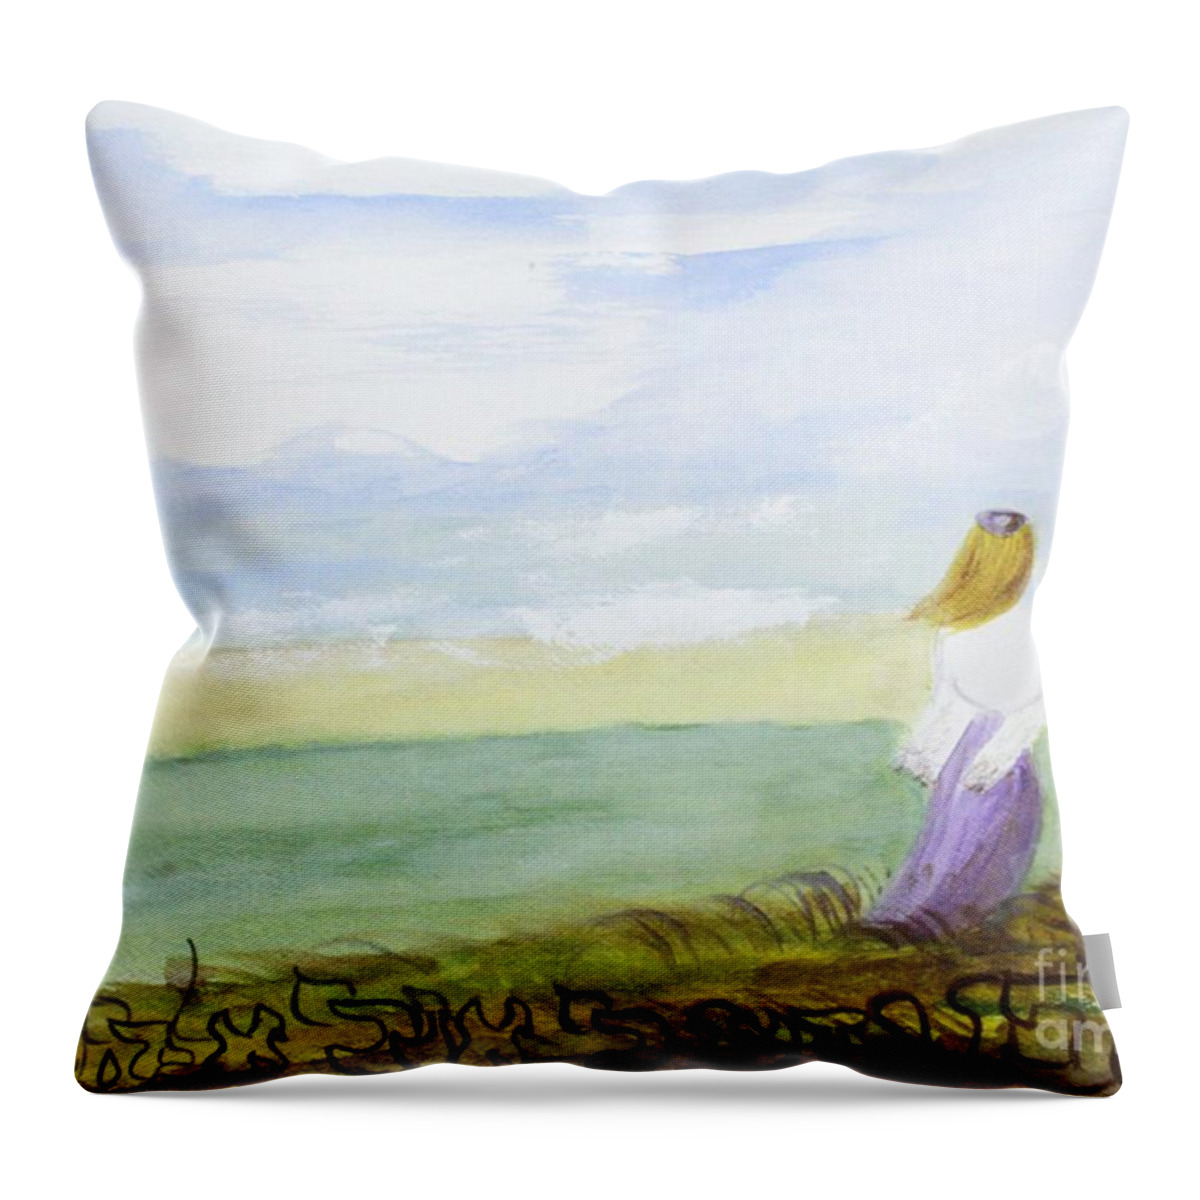 Be Still And Know That I Am God Throw Pillow featuring the painting Be Still And Know That I Am God by Hebrewletters SL